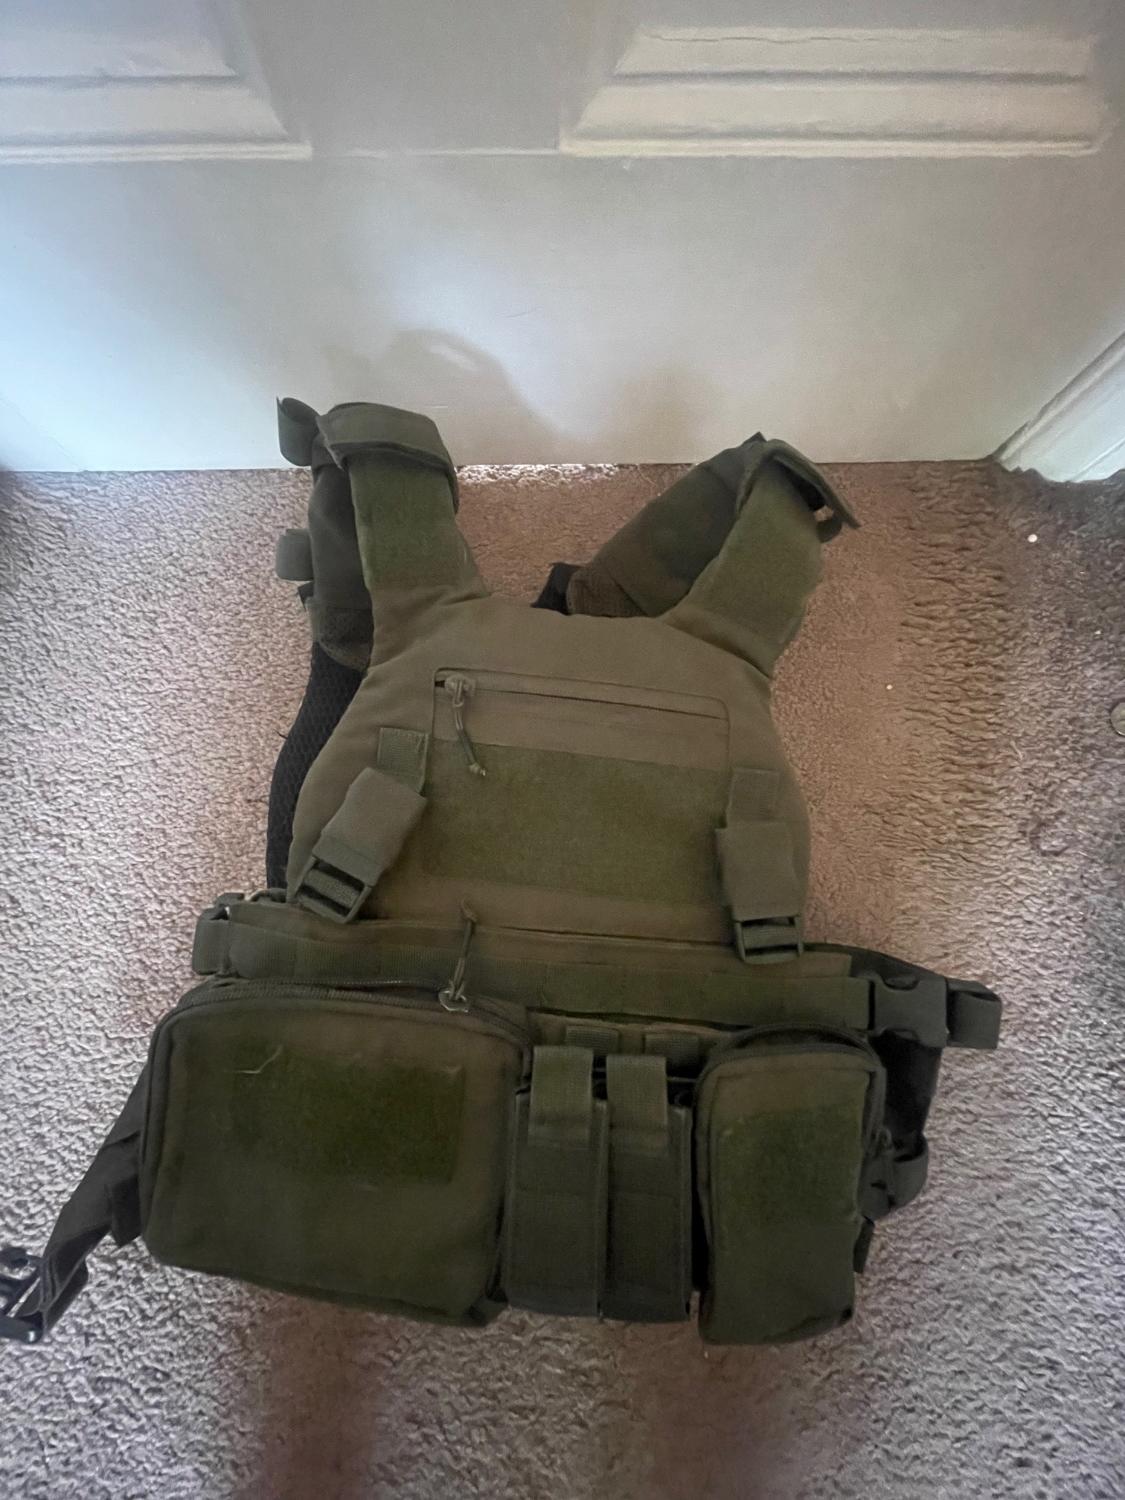 Viper Tactical OD Green Plate Carrier - Gear - Airsoft Forums UK